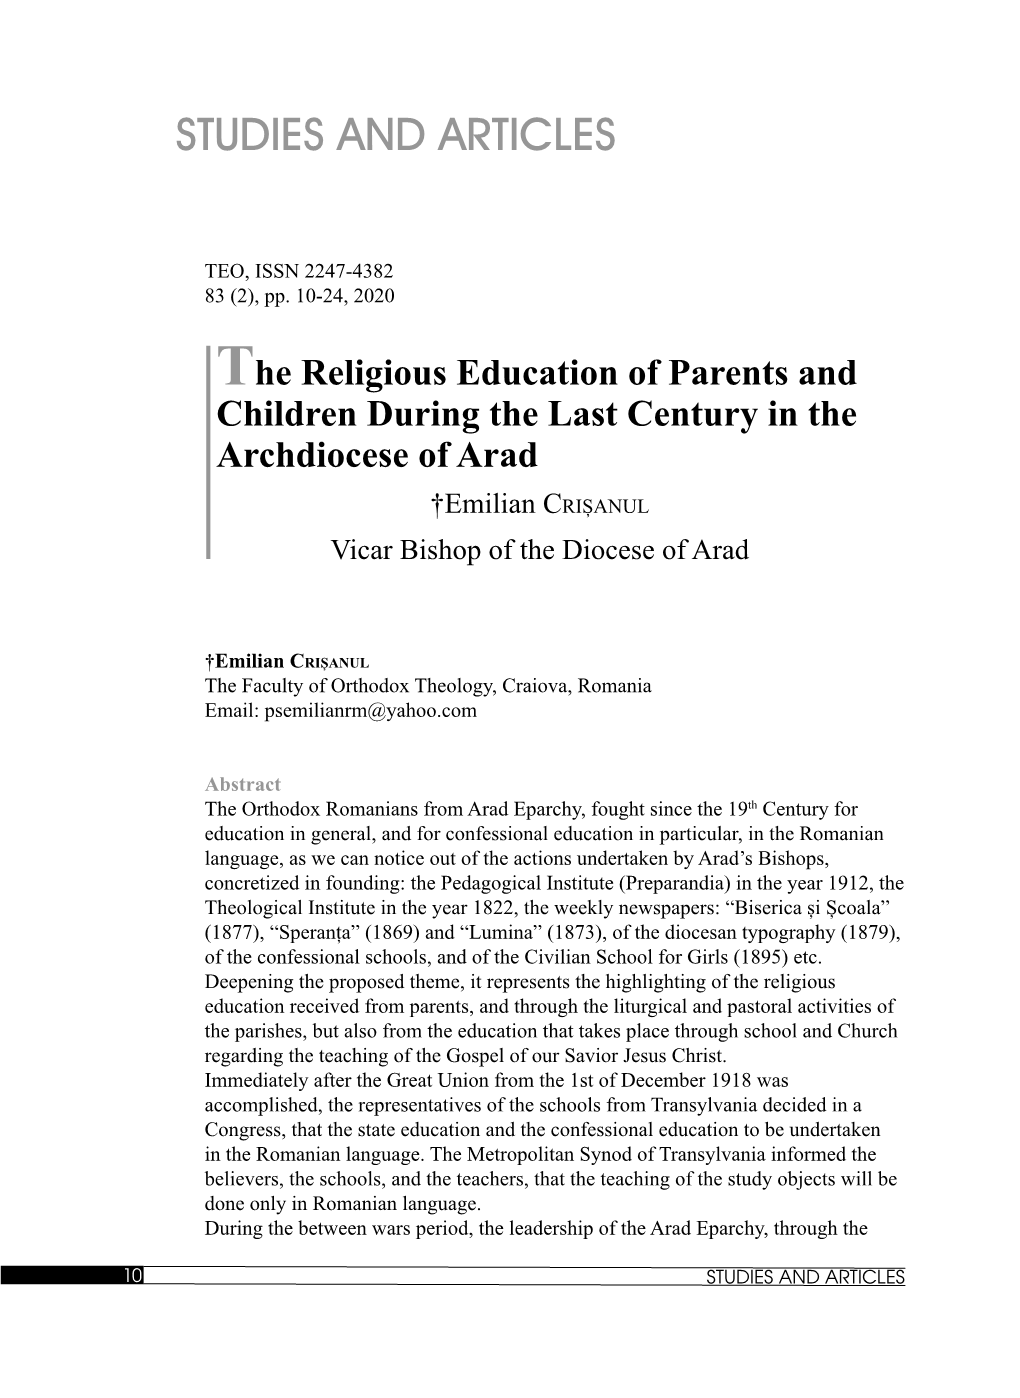 The Religious Education of Parents and Children During the Last Century in the Archdiocese of Arad